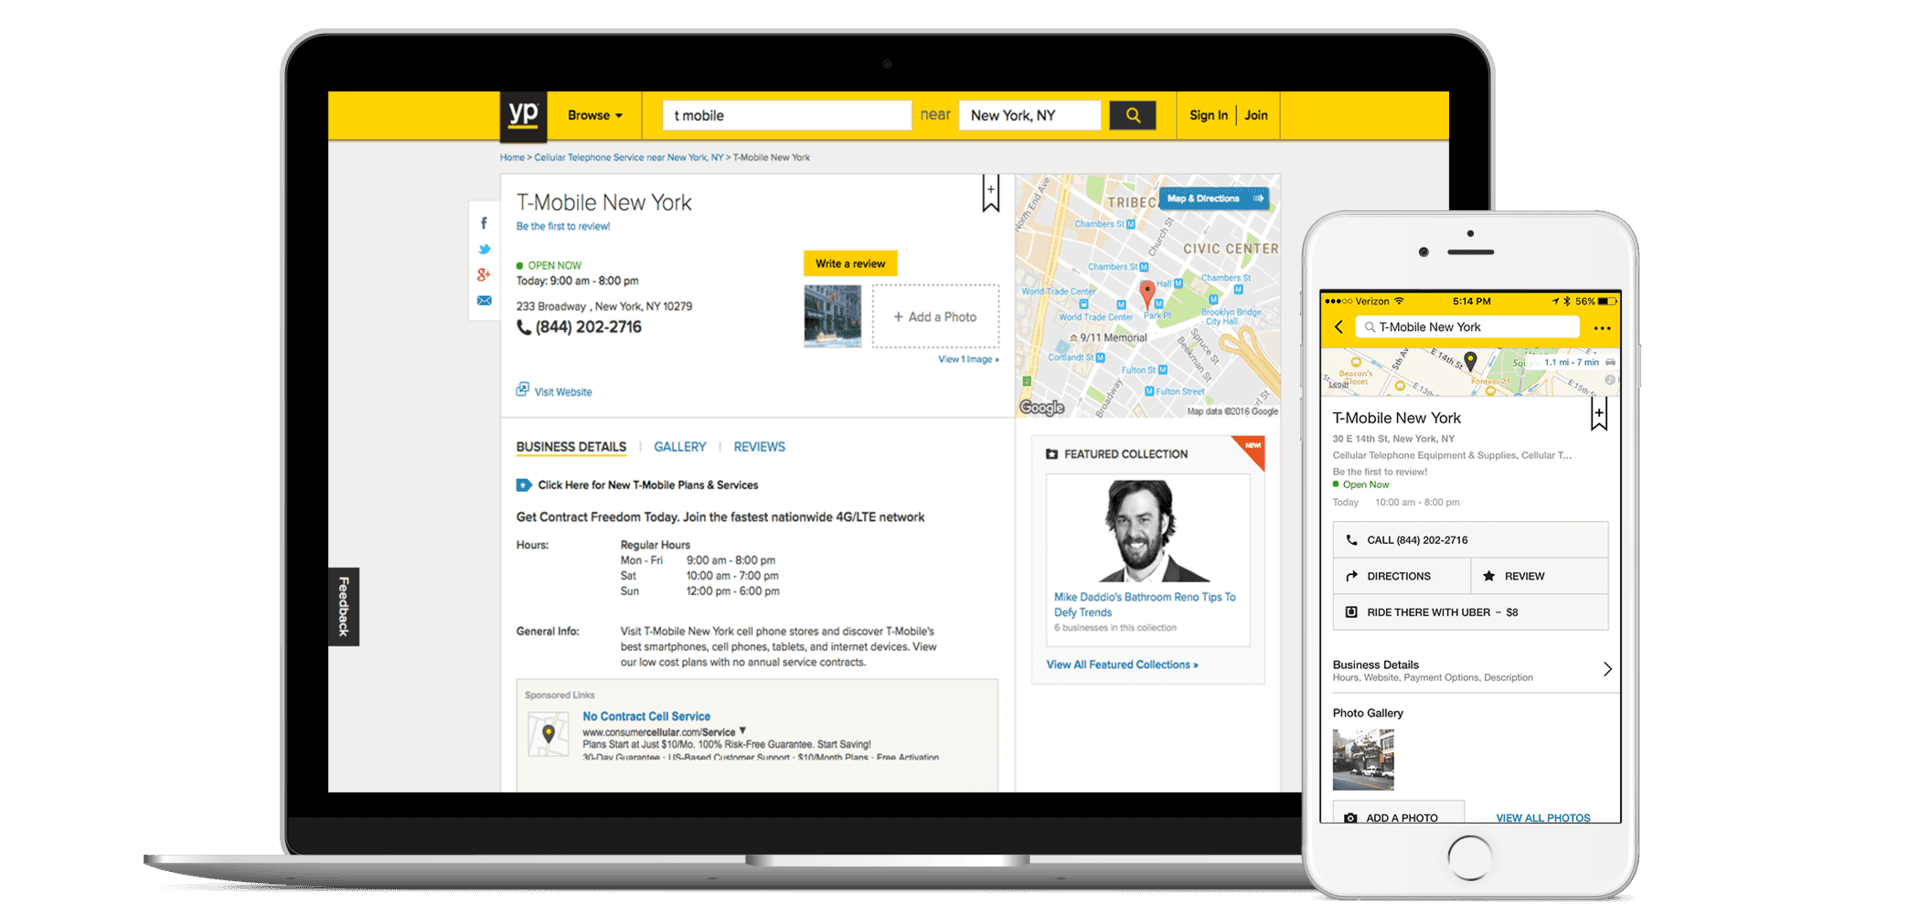 SEO Yellow Pages Marketing Agency